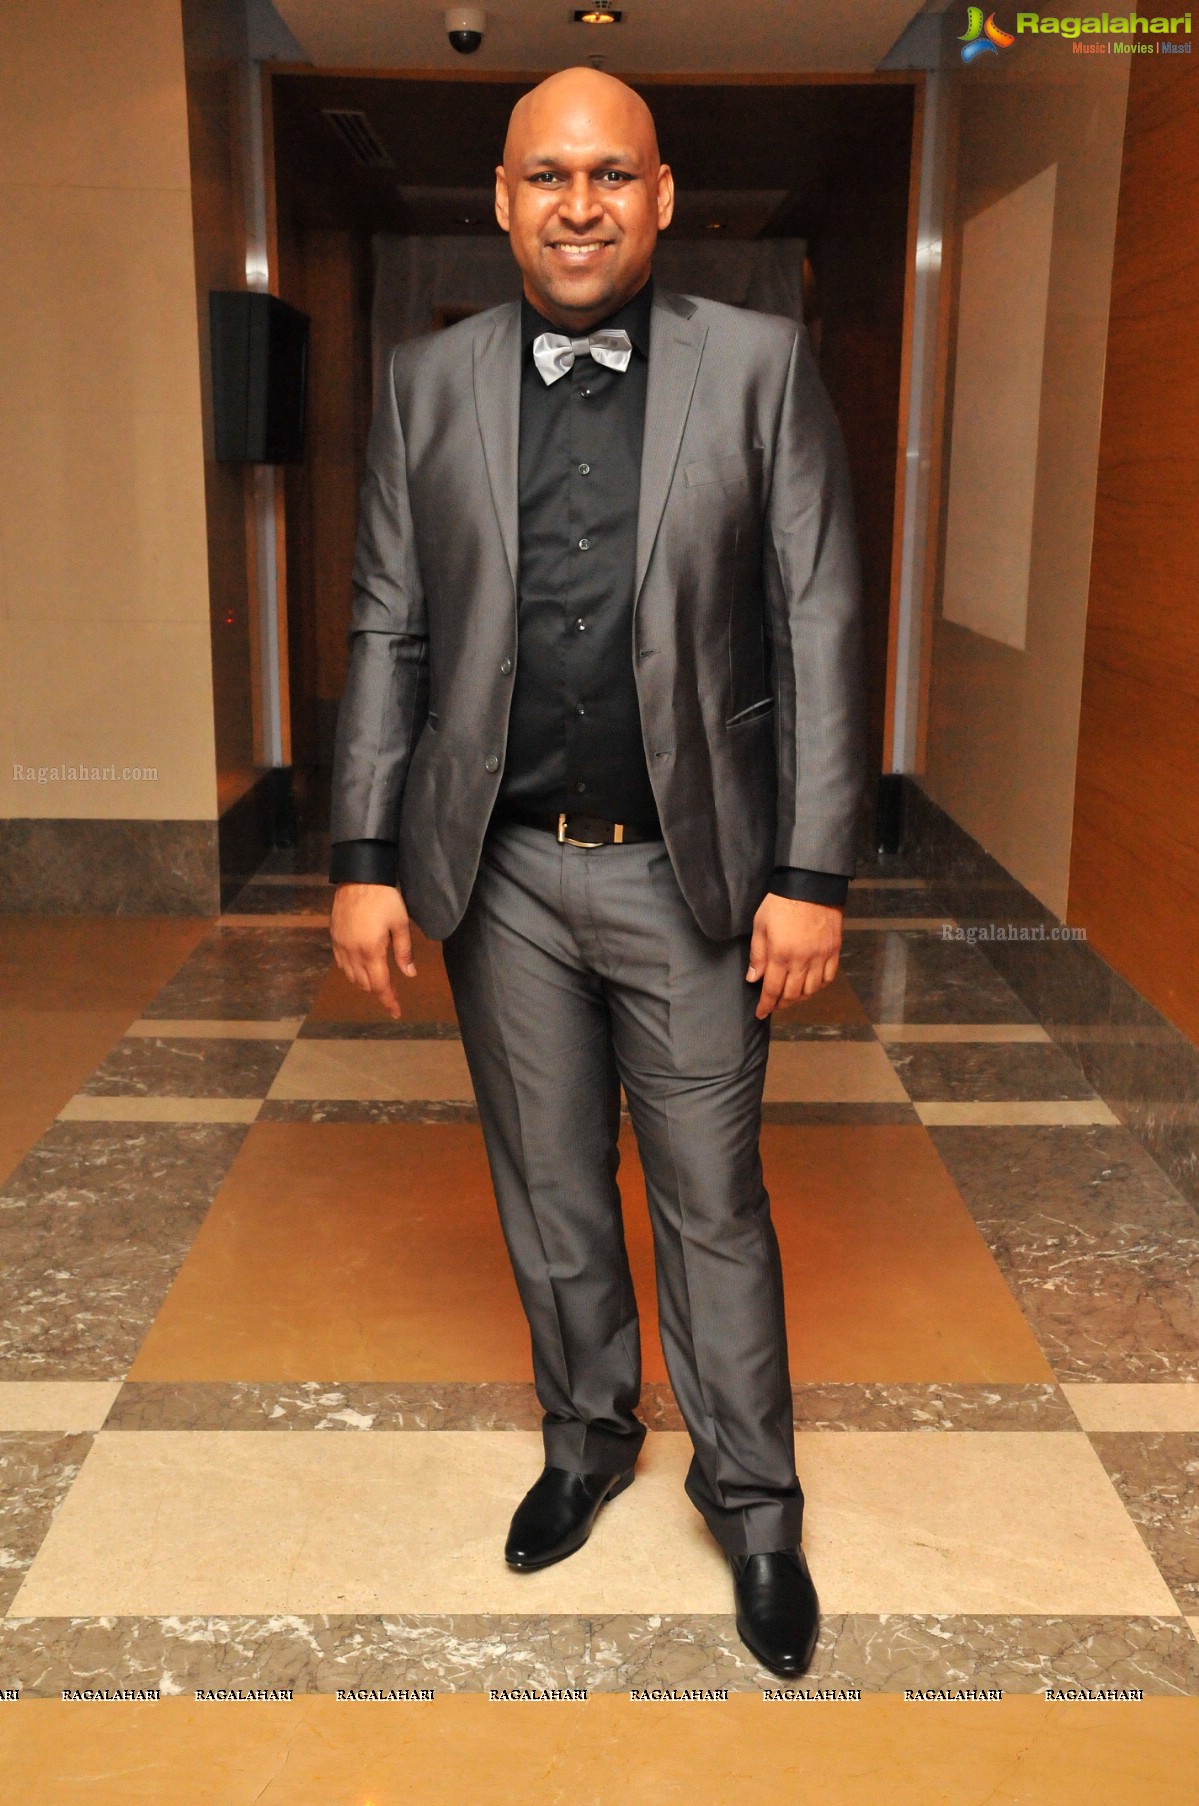 The Great Gatsby Theme Party for 60th Birthday Party of Mr. Rakesh